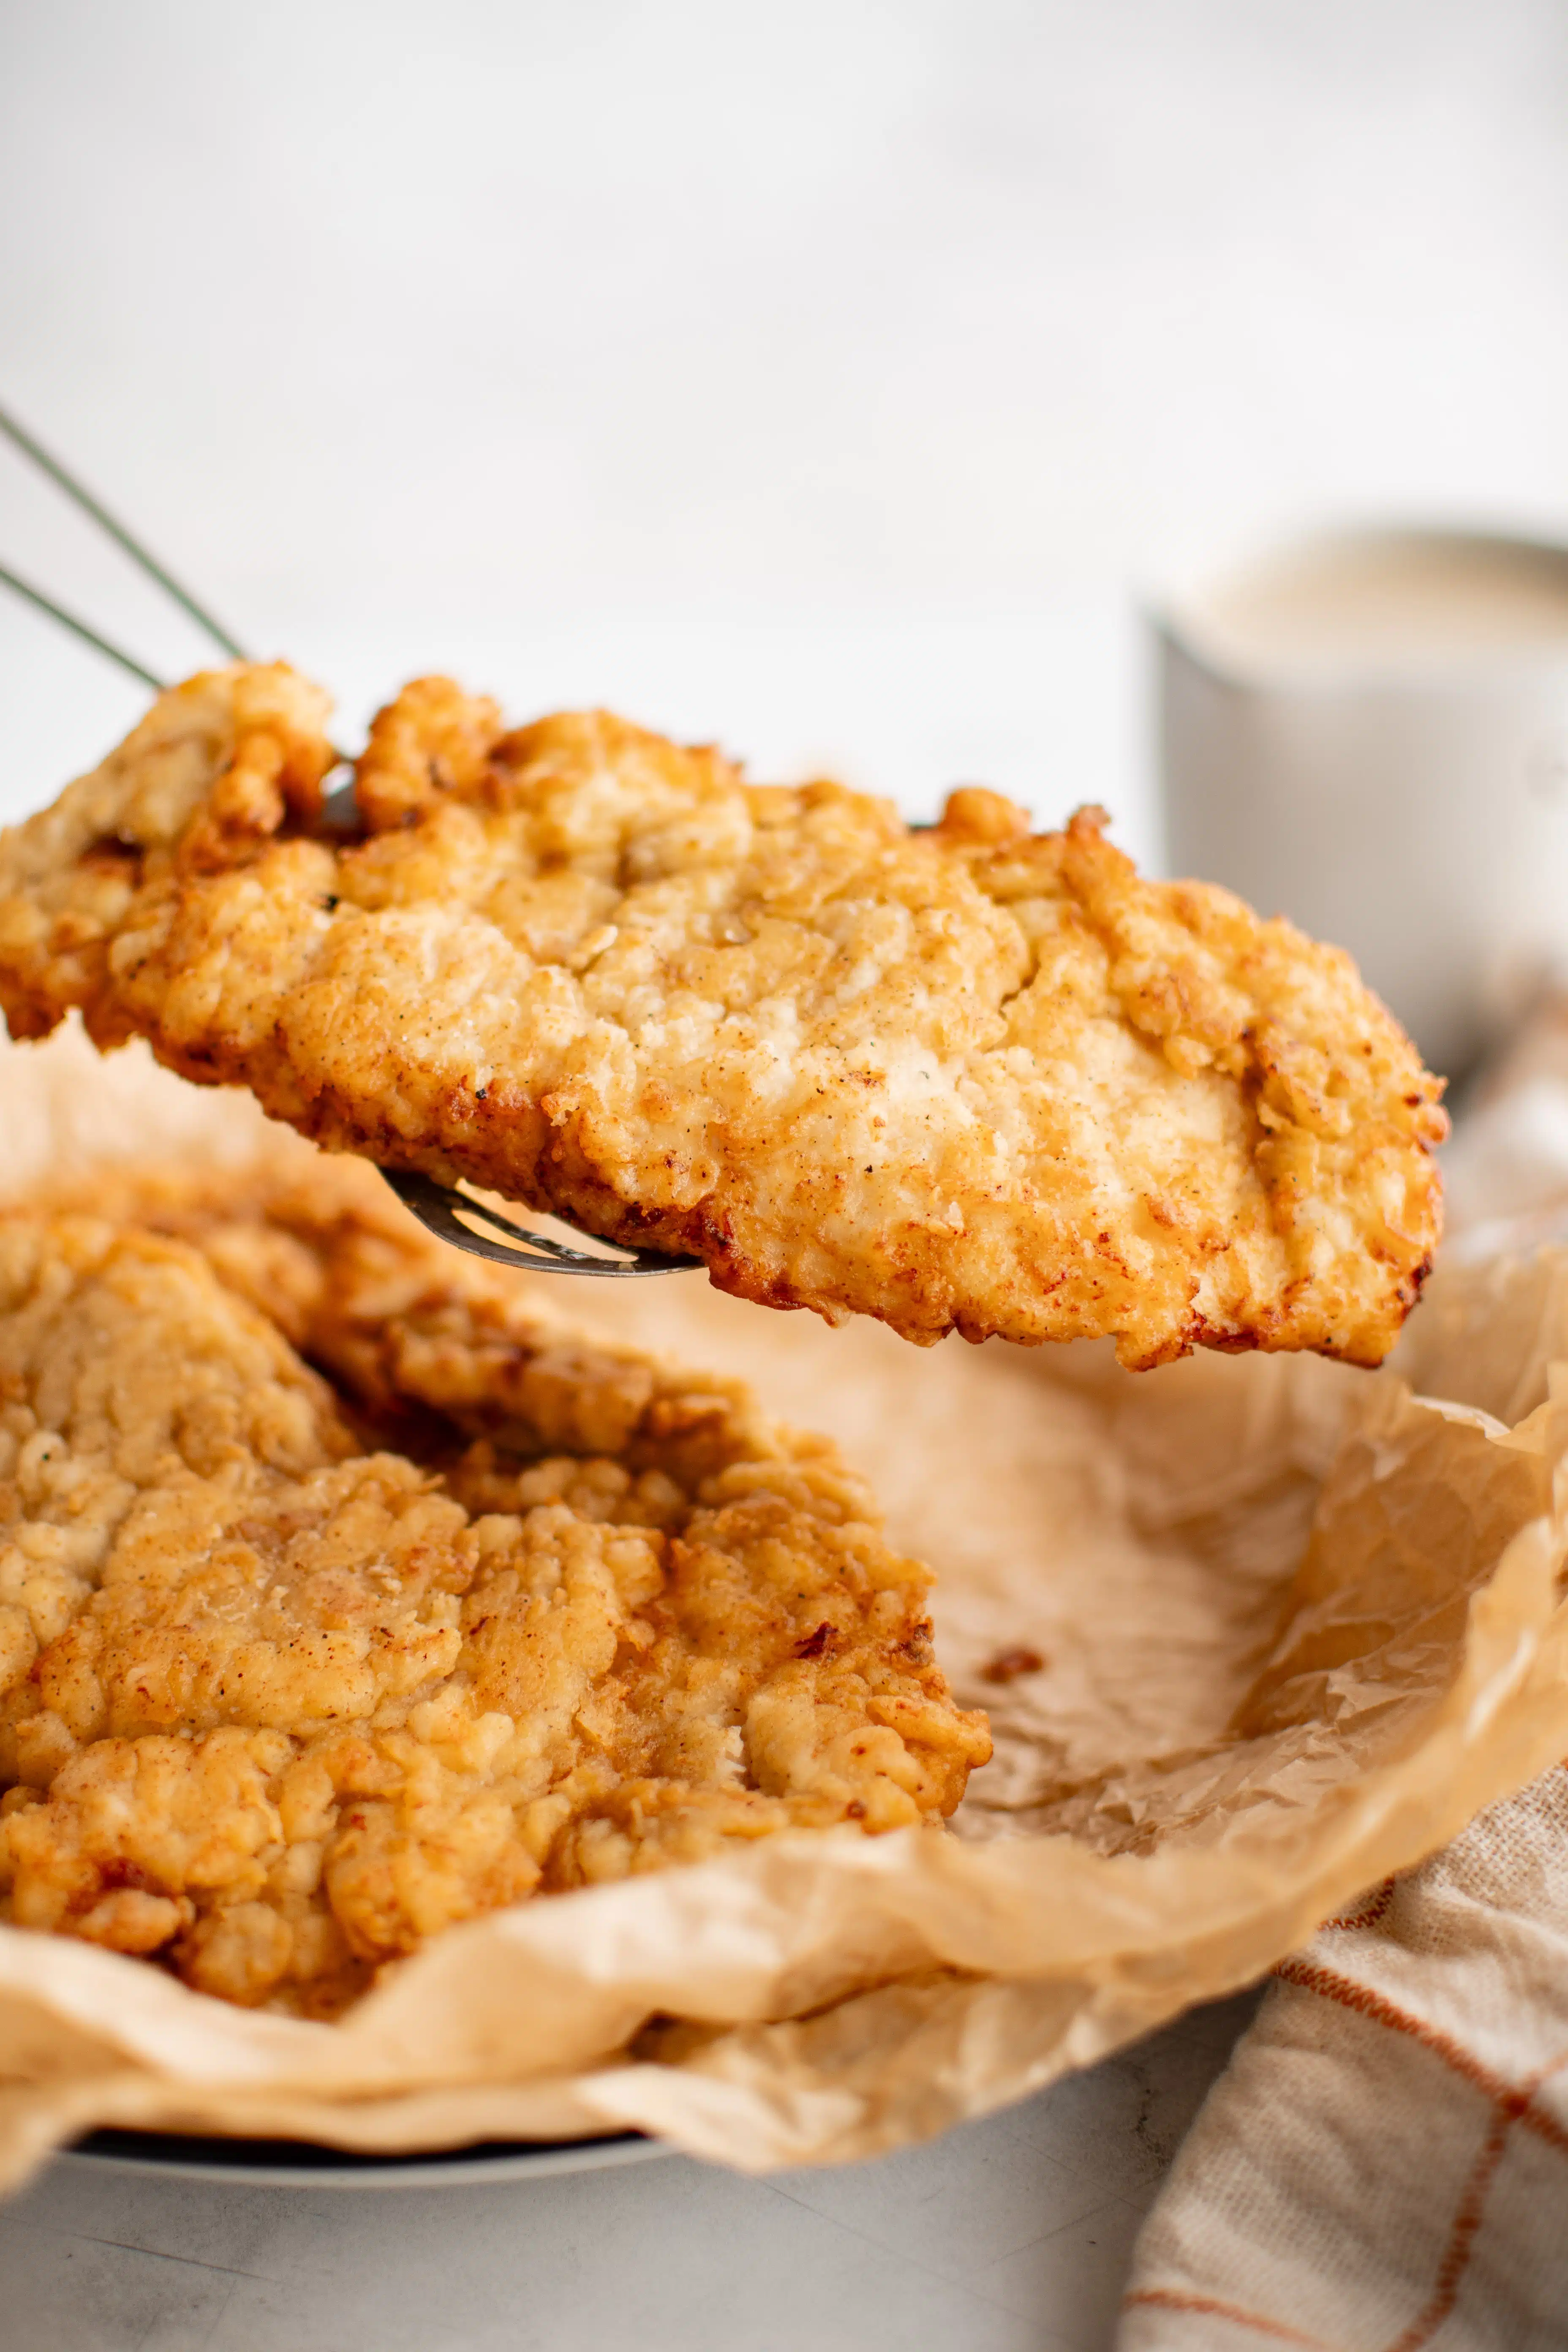 Metal tongs holding a breaded and fried piece of chicken fried chicken from a plate lined with brown wax paper.